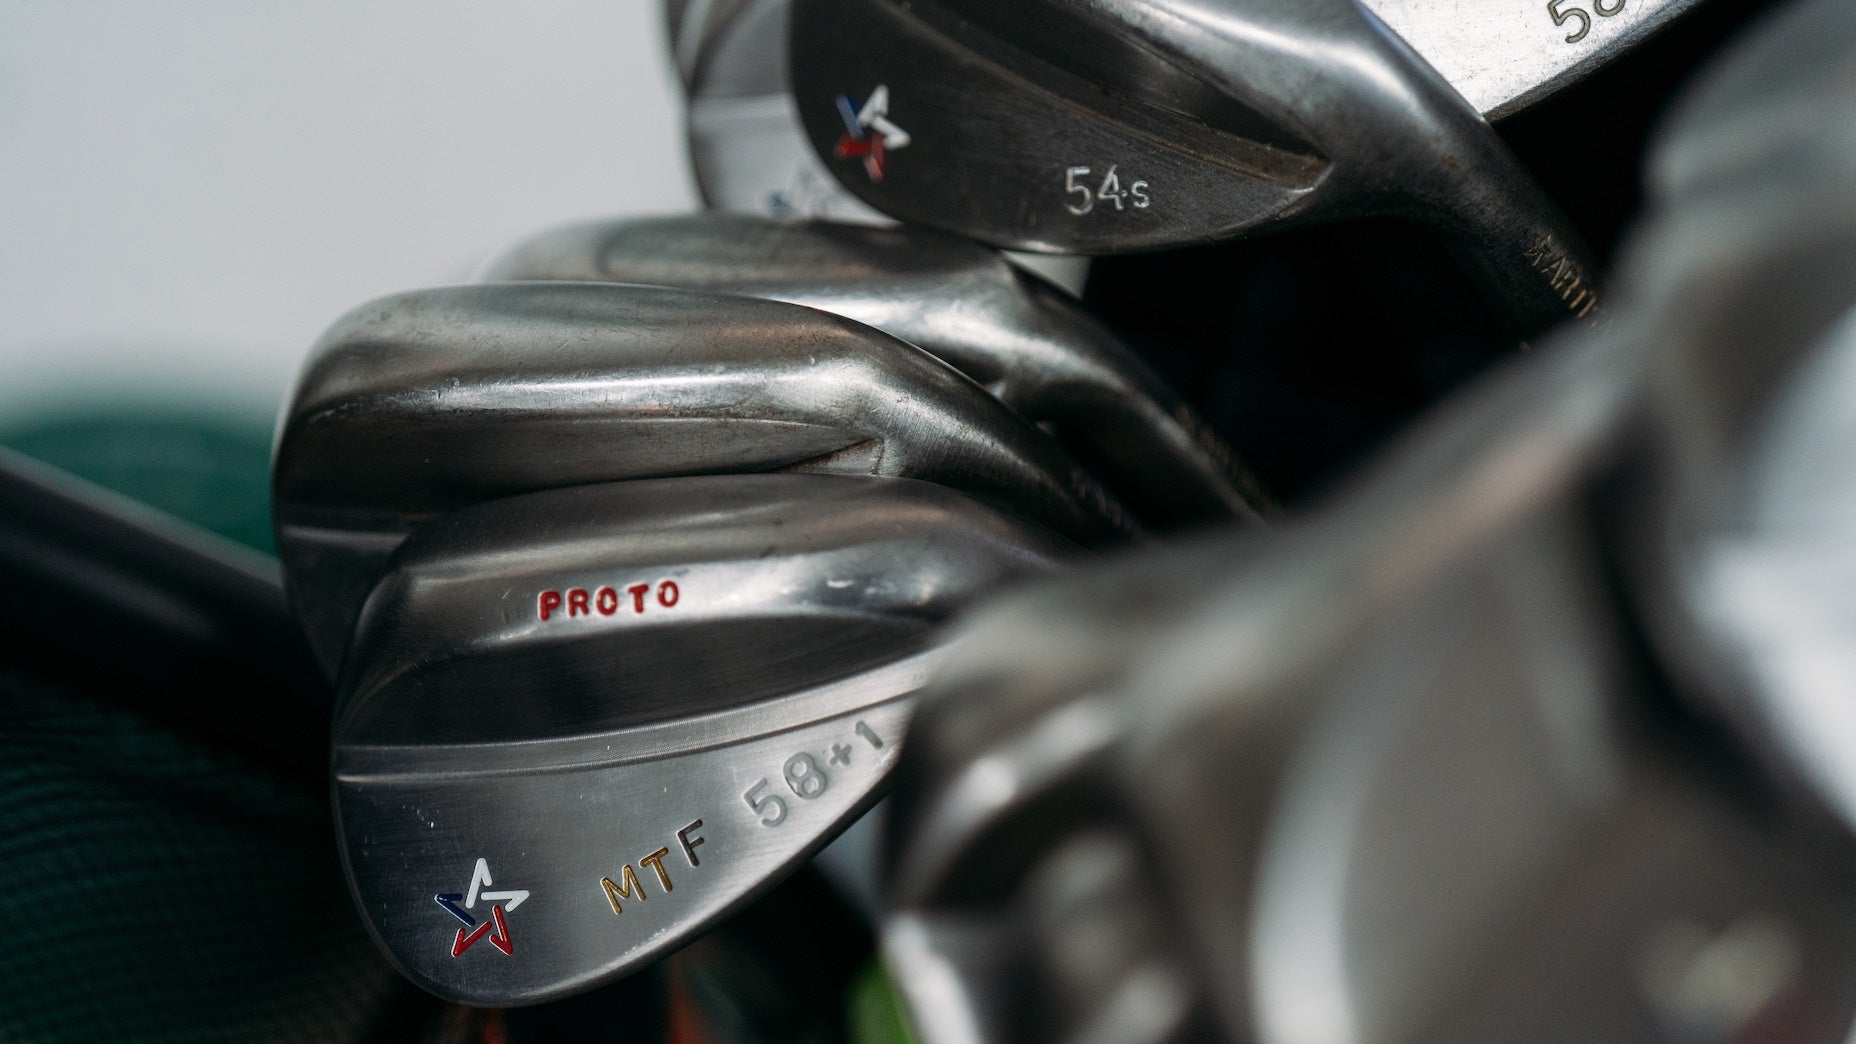 golf lob wedges for sale